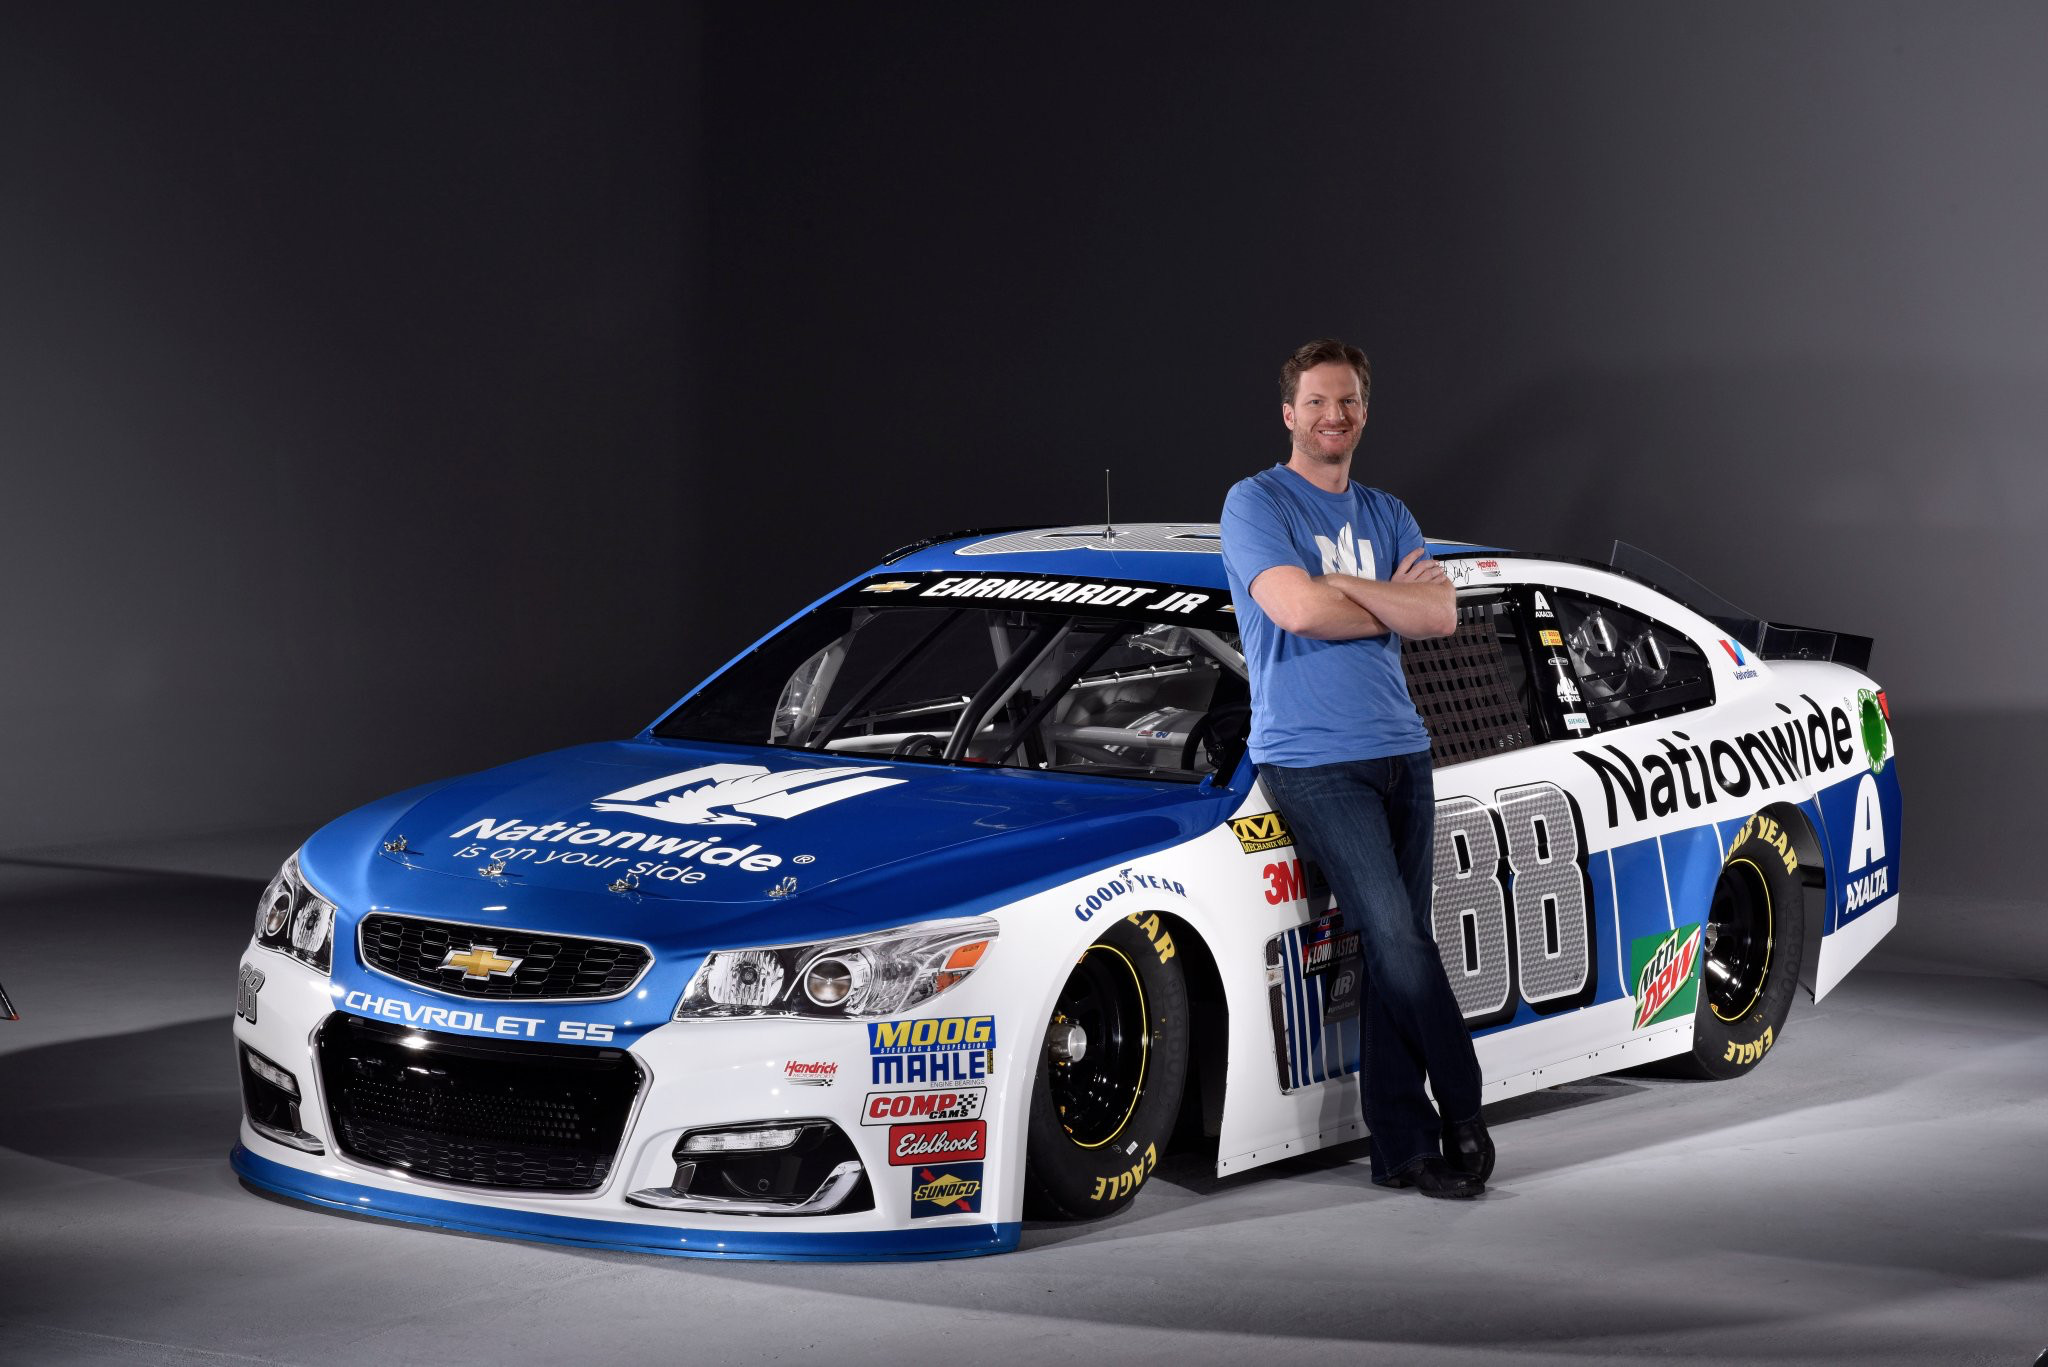 2048x1367 Dale Earnhardt Jr and his 88 Nationwide 2017 car